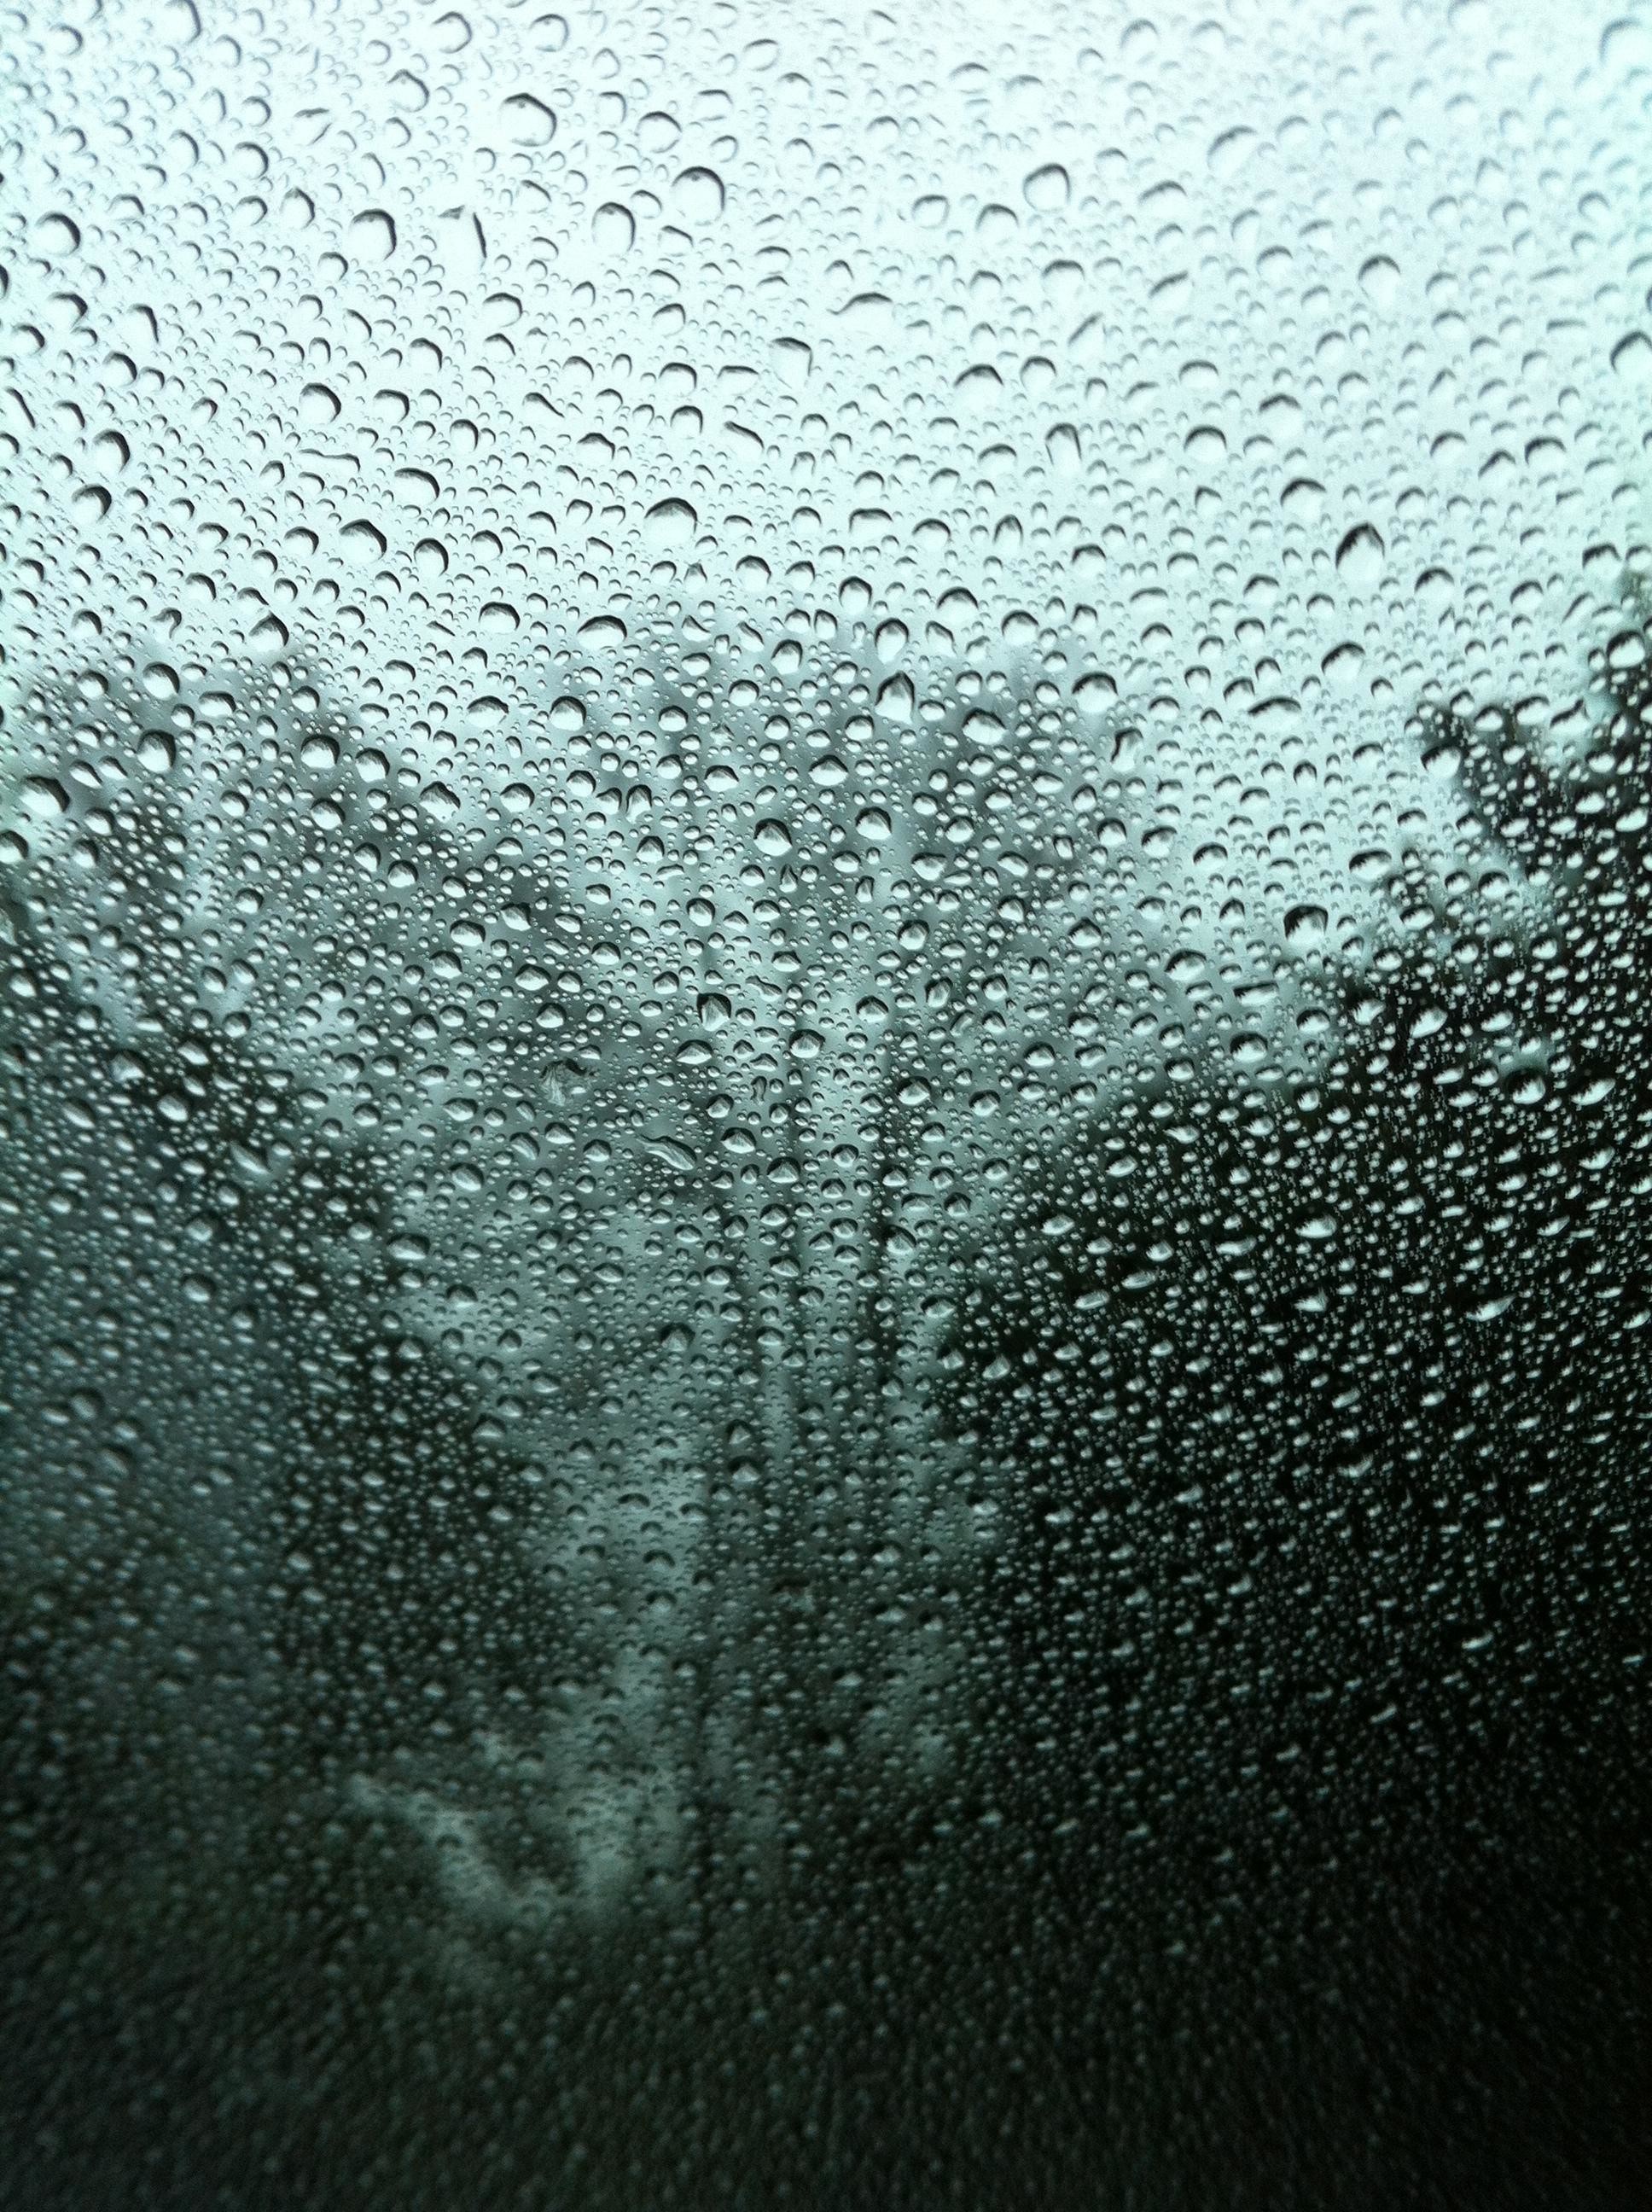 1936x2592 Raindrops on a windshield. My iPhone wallpaper for the past 2 years.